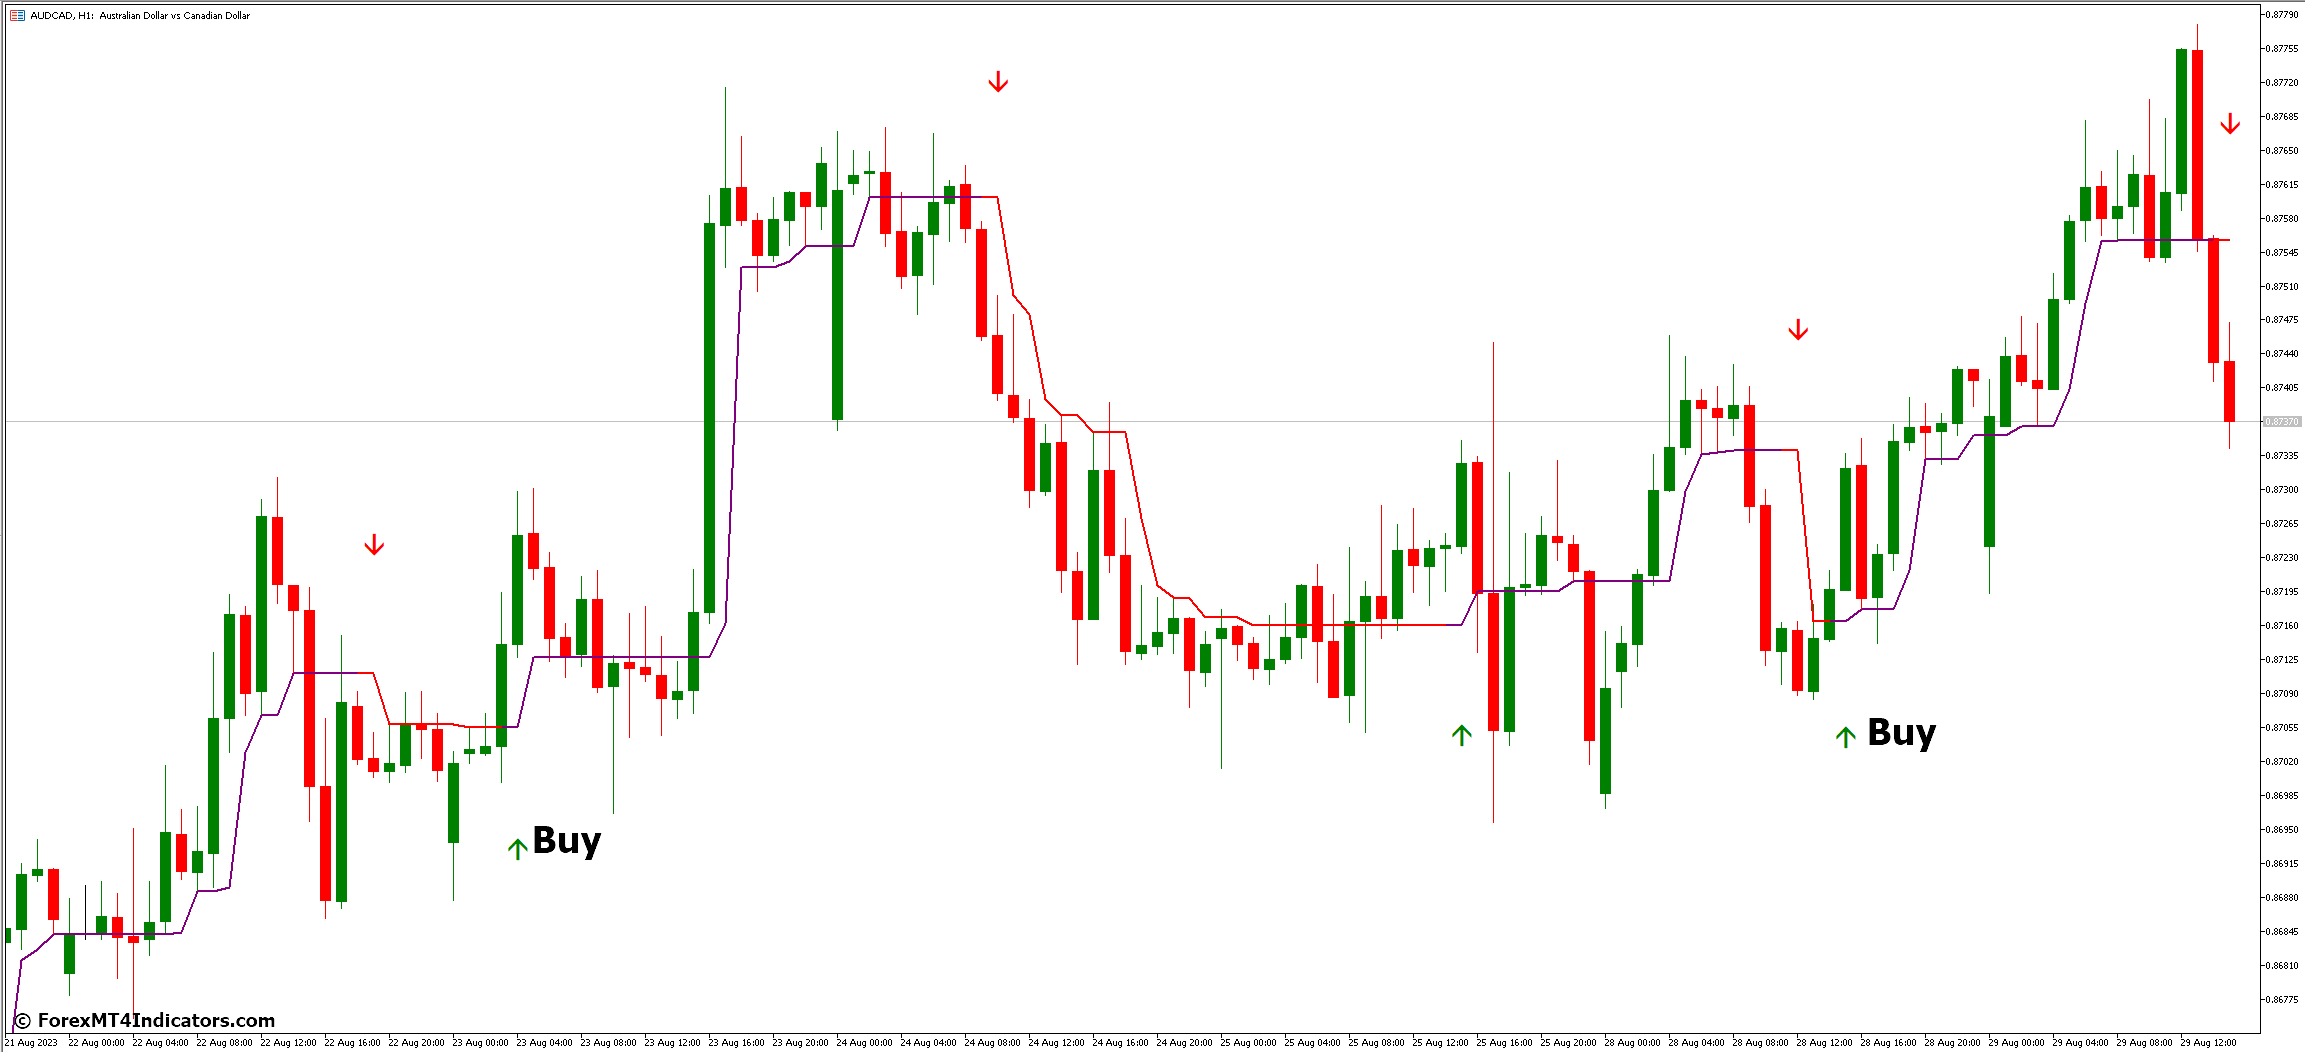 How to Trade with Half Trend Buy Sell MT5 Indicator - Buy Entry